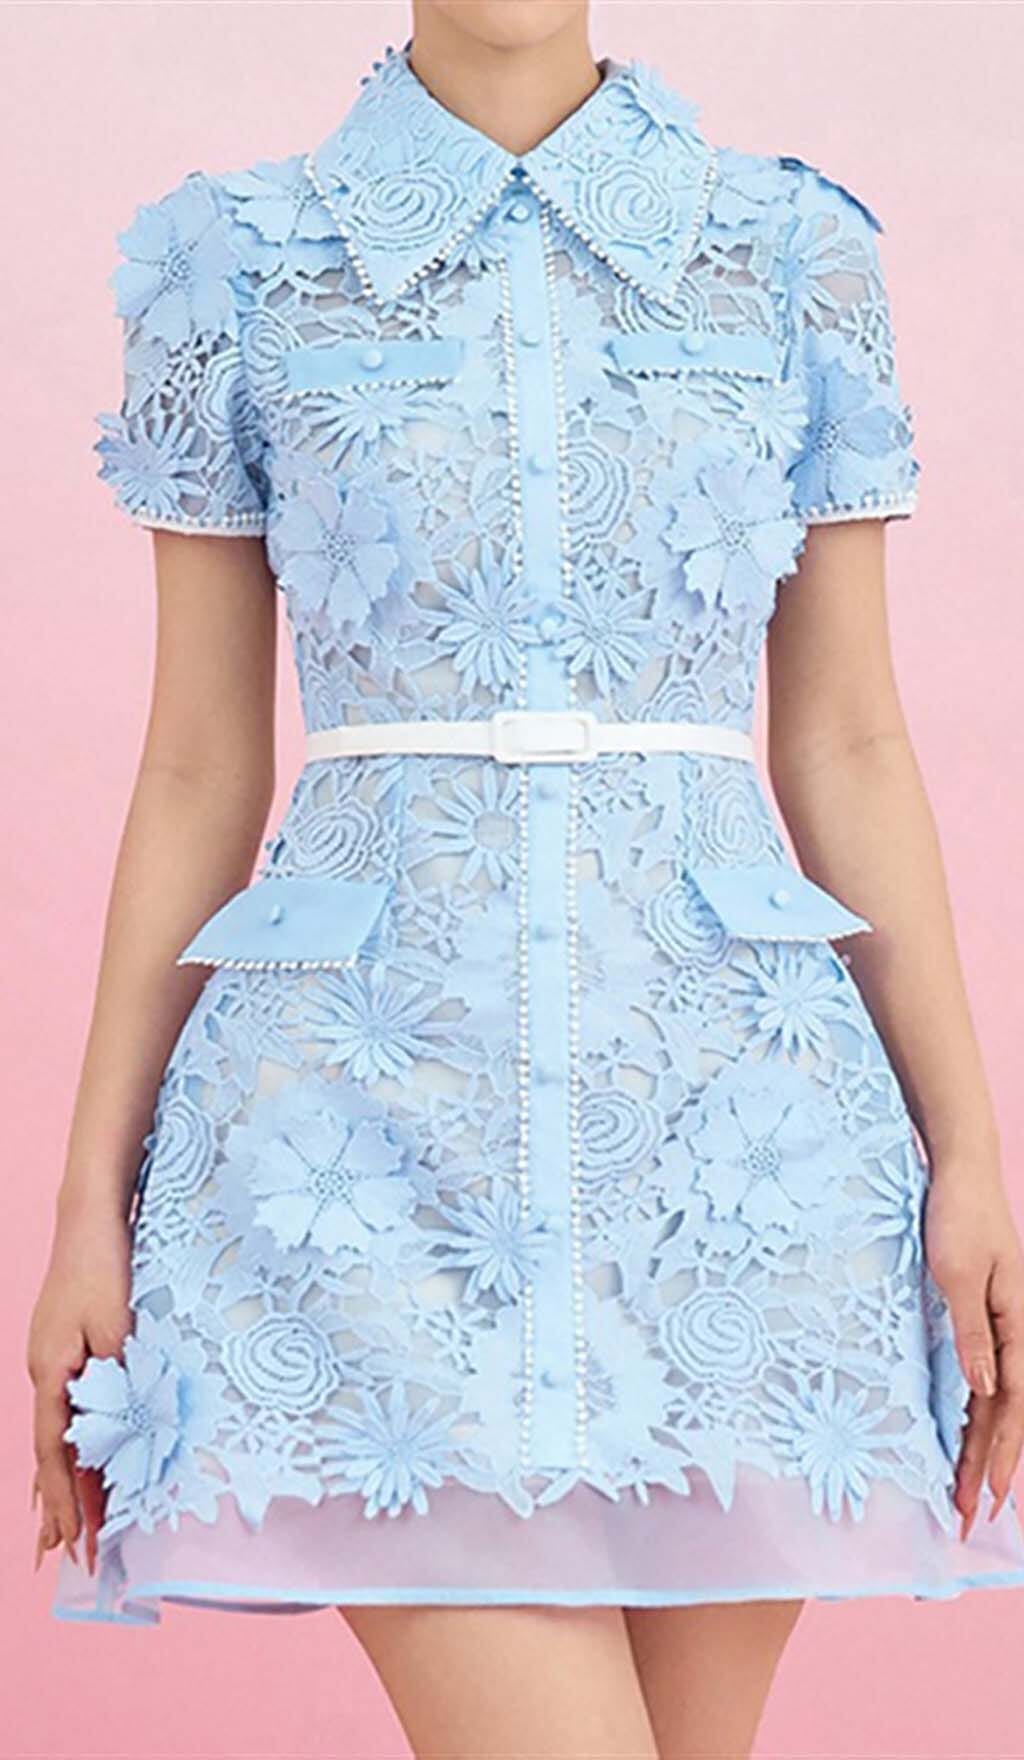 A-LINE FLORAL EMBROIDERY MINI DRESS IN BLUE